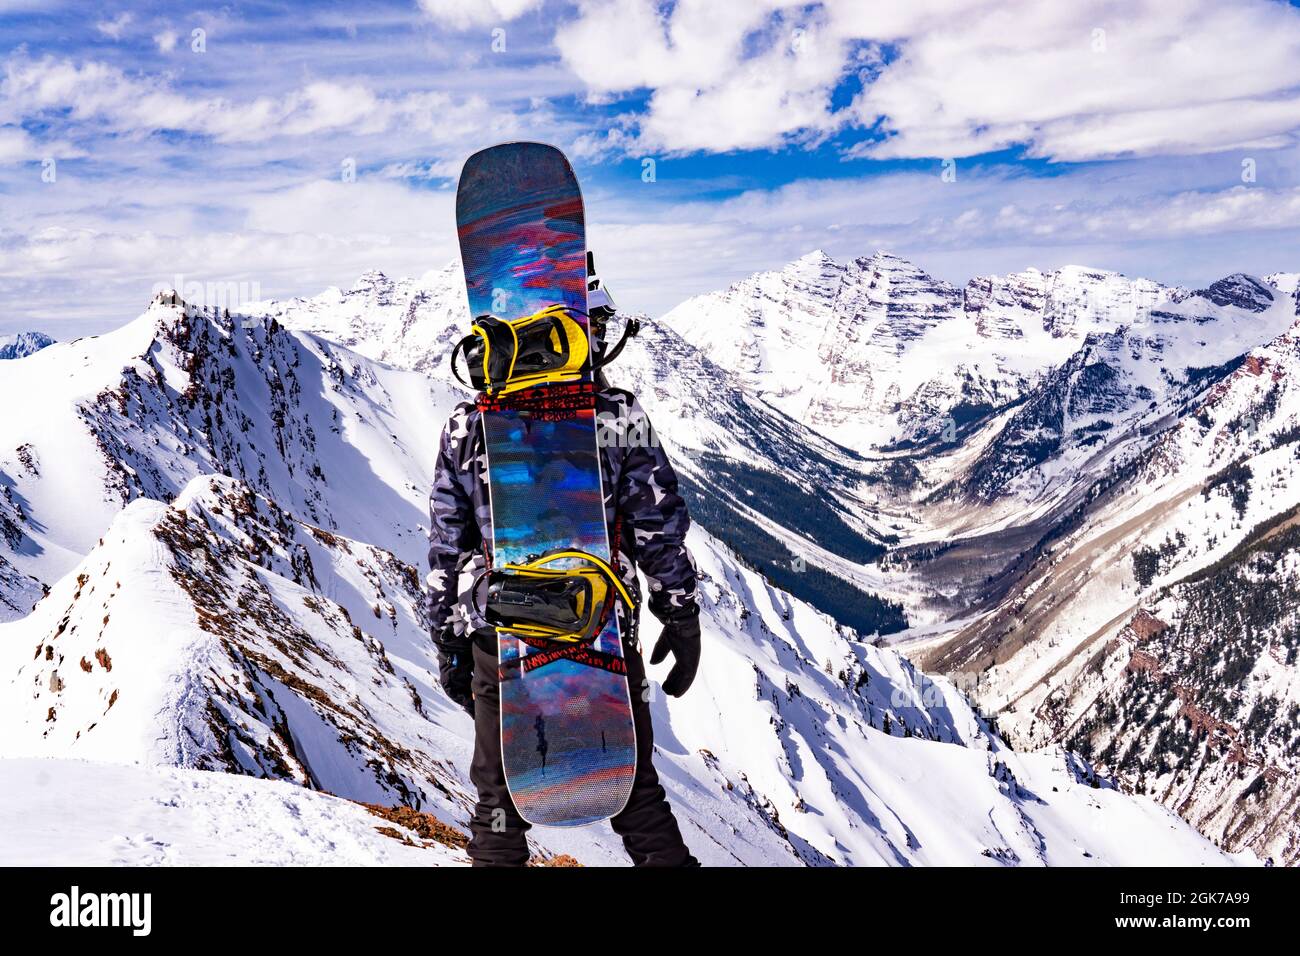 Man With Snow Board On Back In Extreme Snow Mountain Landscape Summit Stock Photo